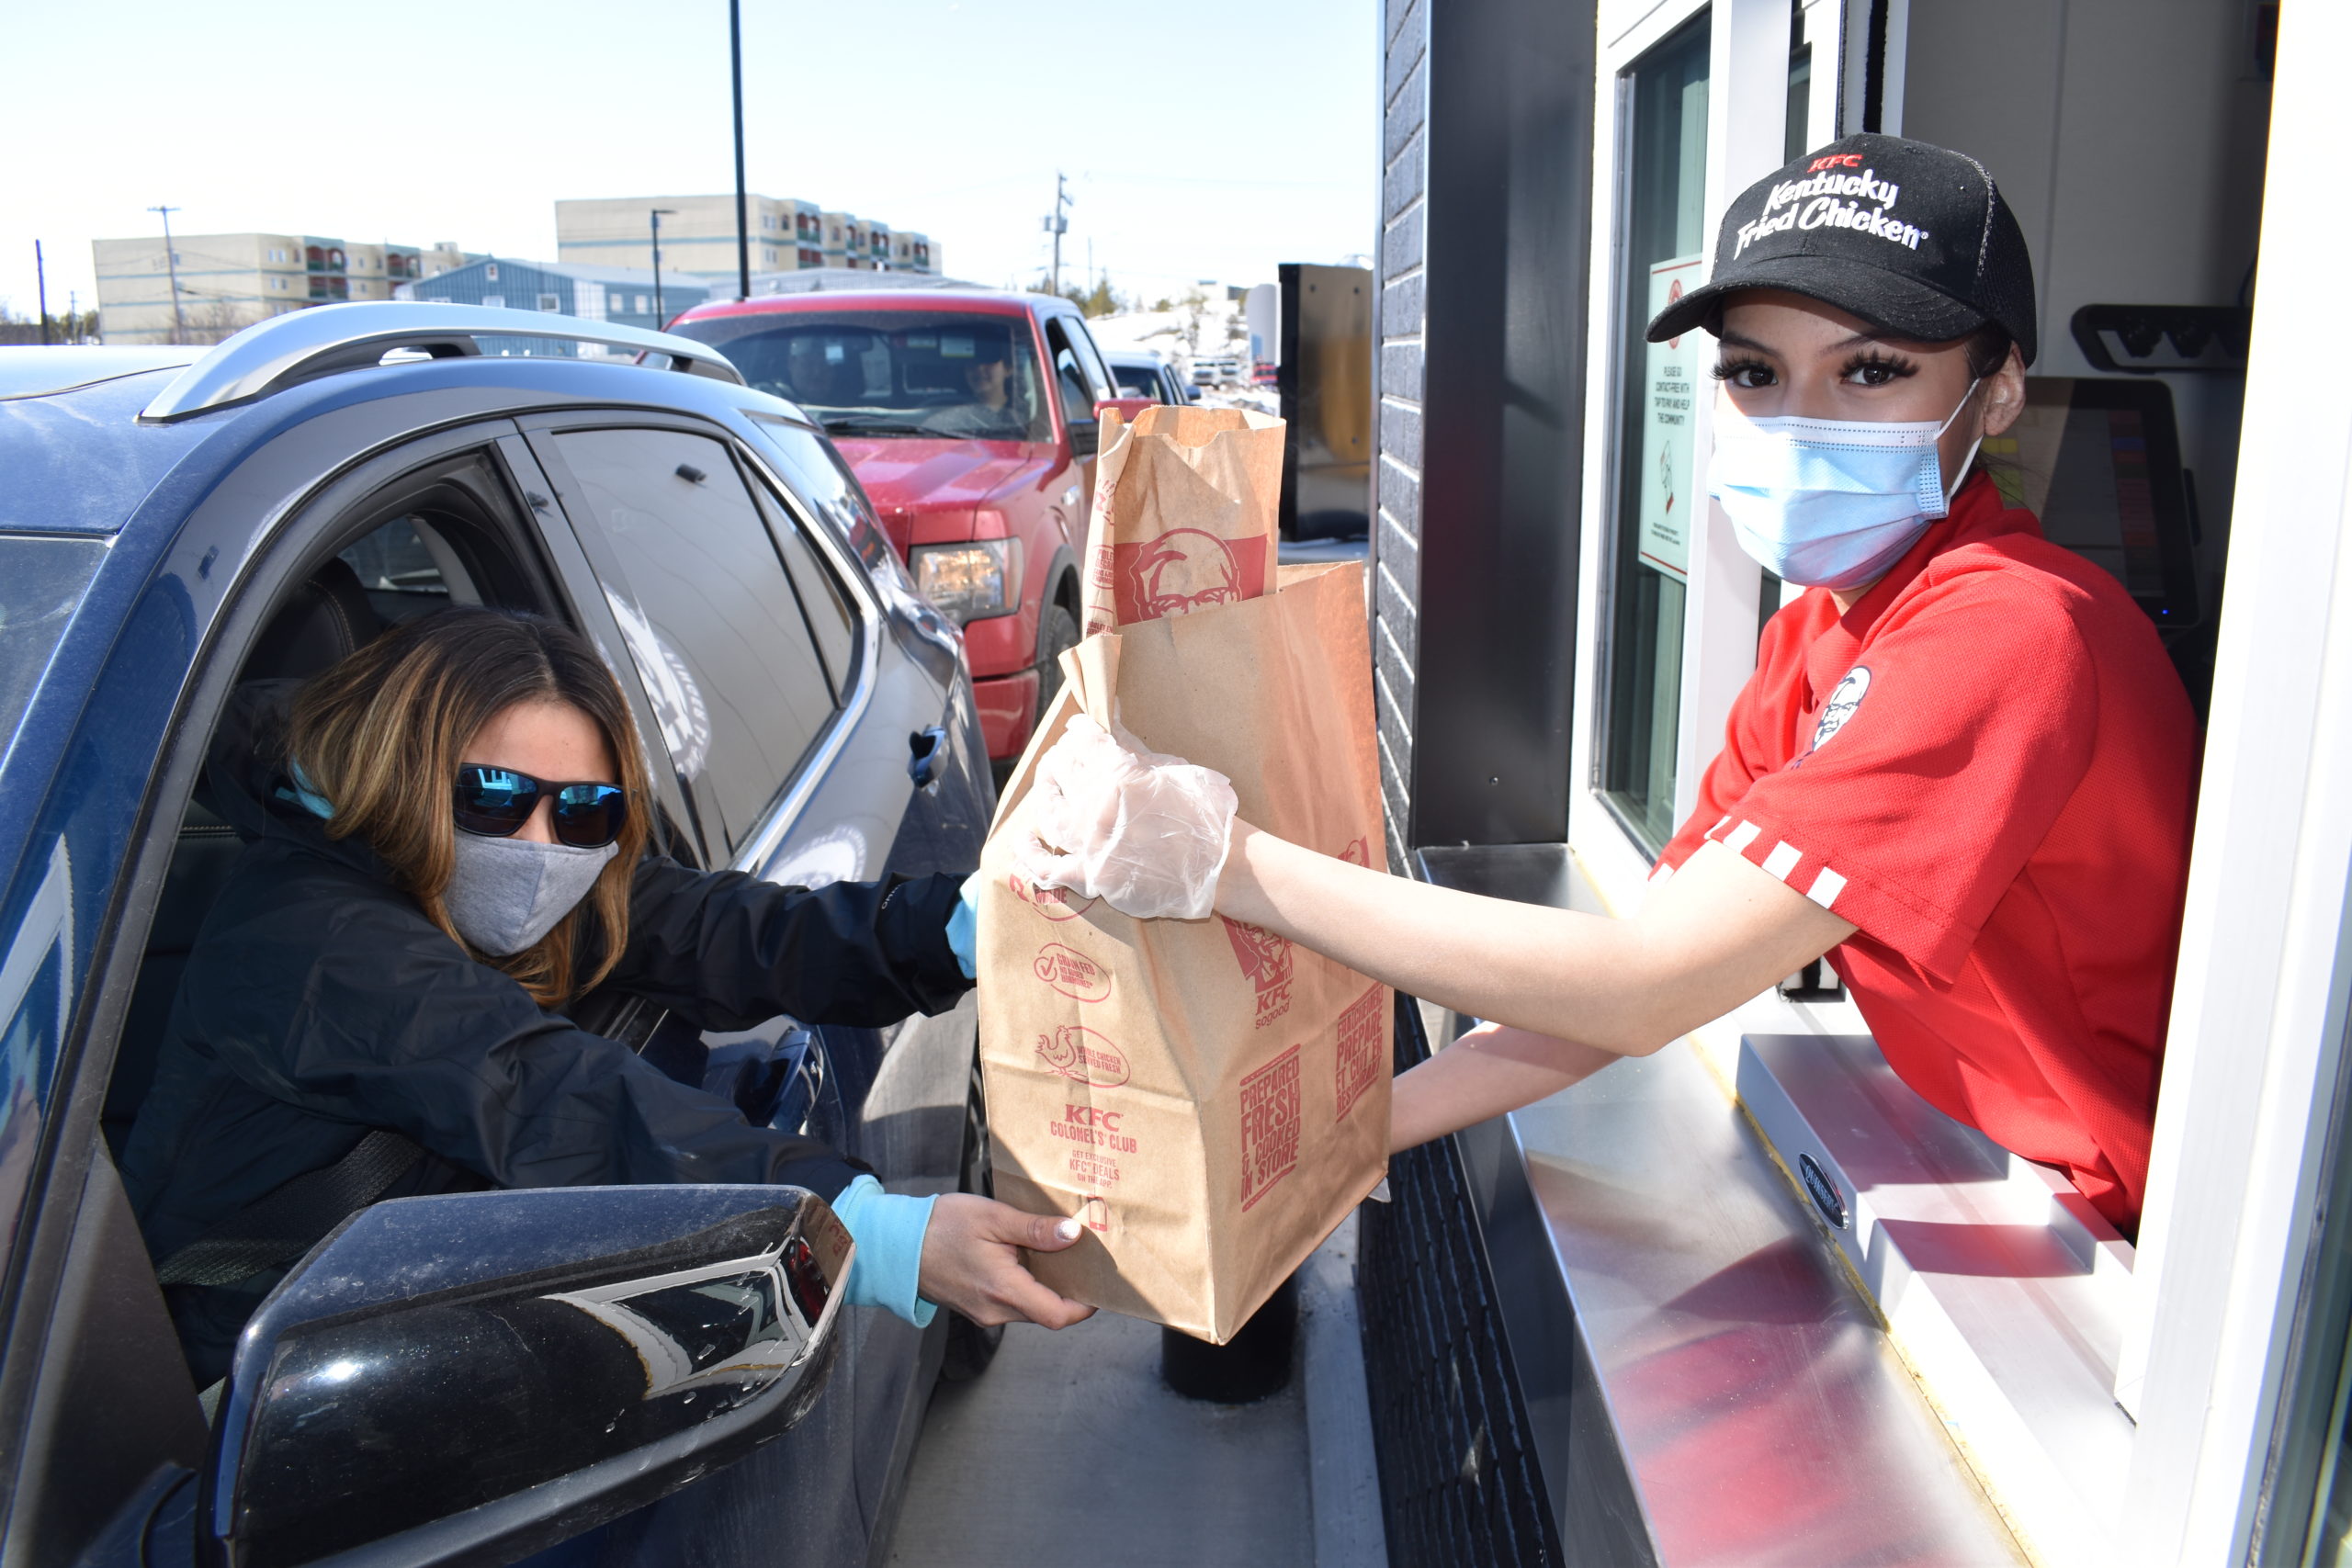 Karen Martin, left, receives her hot bag of chicken from attendant Kaya Goulet. "This is my first job ever," said Goulet. "It’s a bit overwhelming but I know everyone in Yellowknife is really excited about this day." Blair McBride/NNSL photo